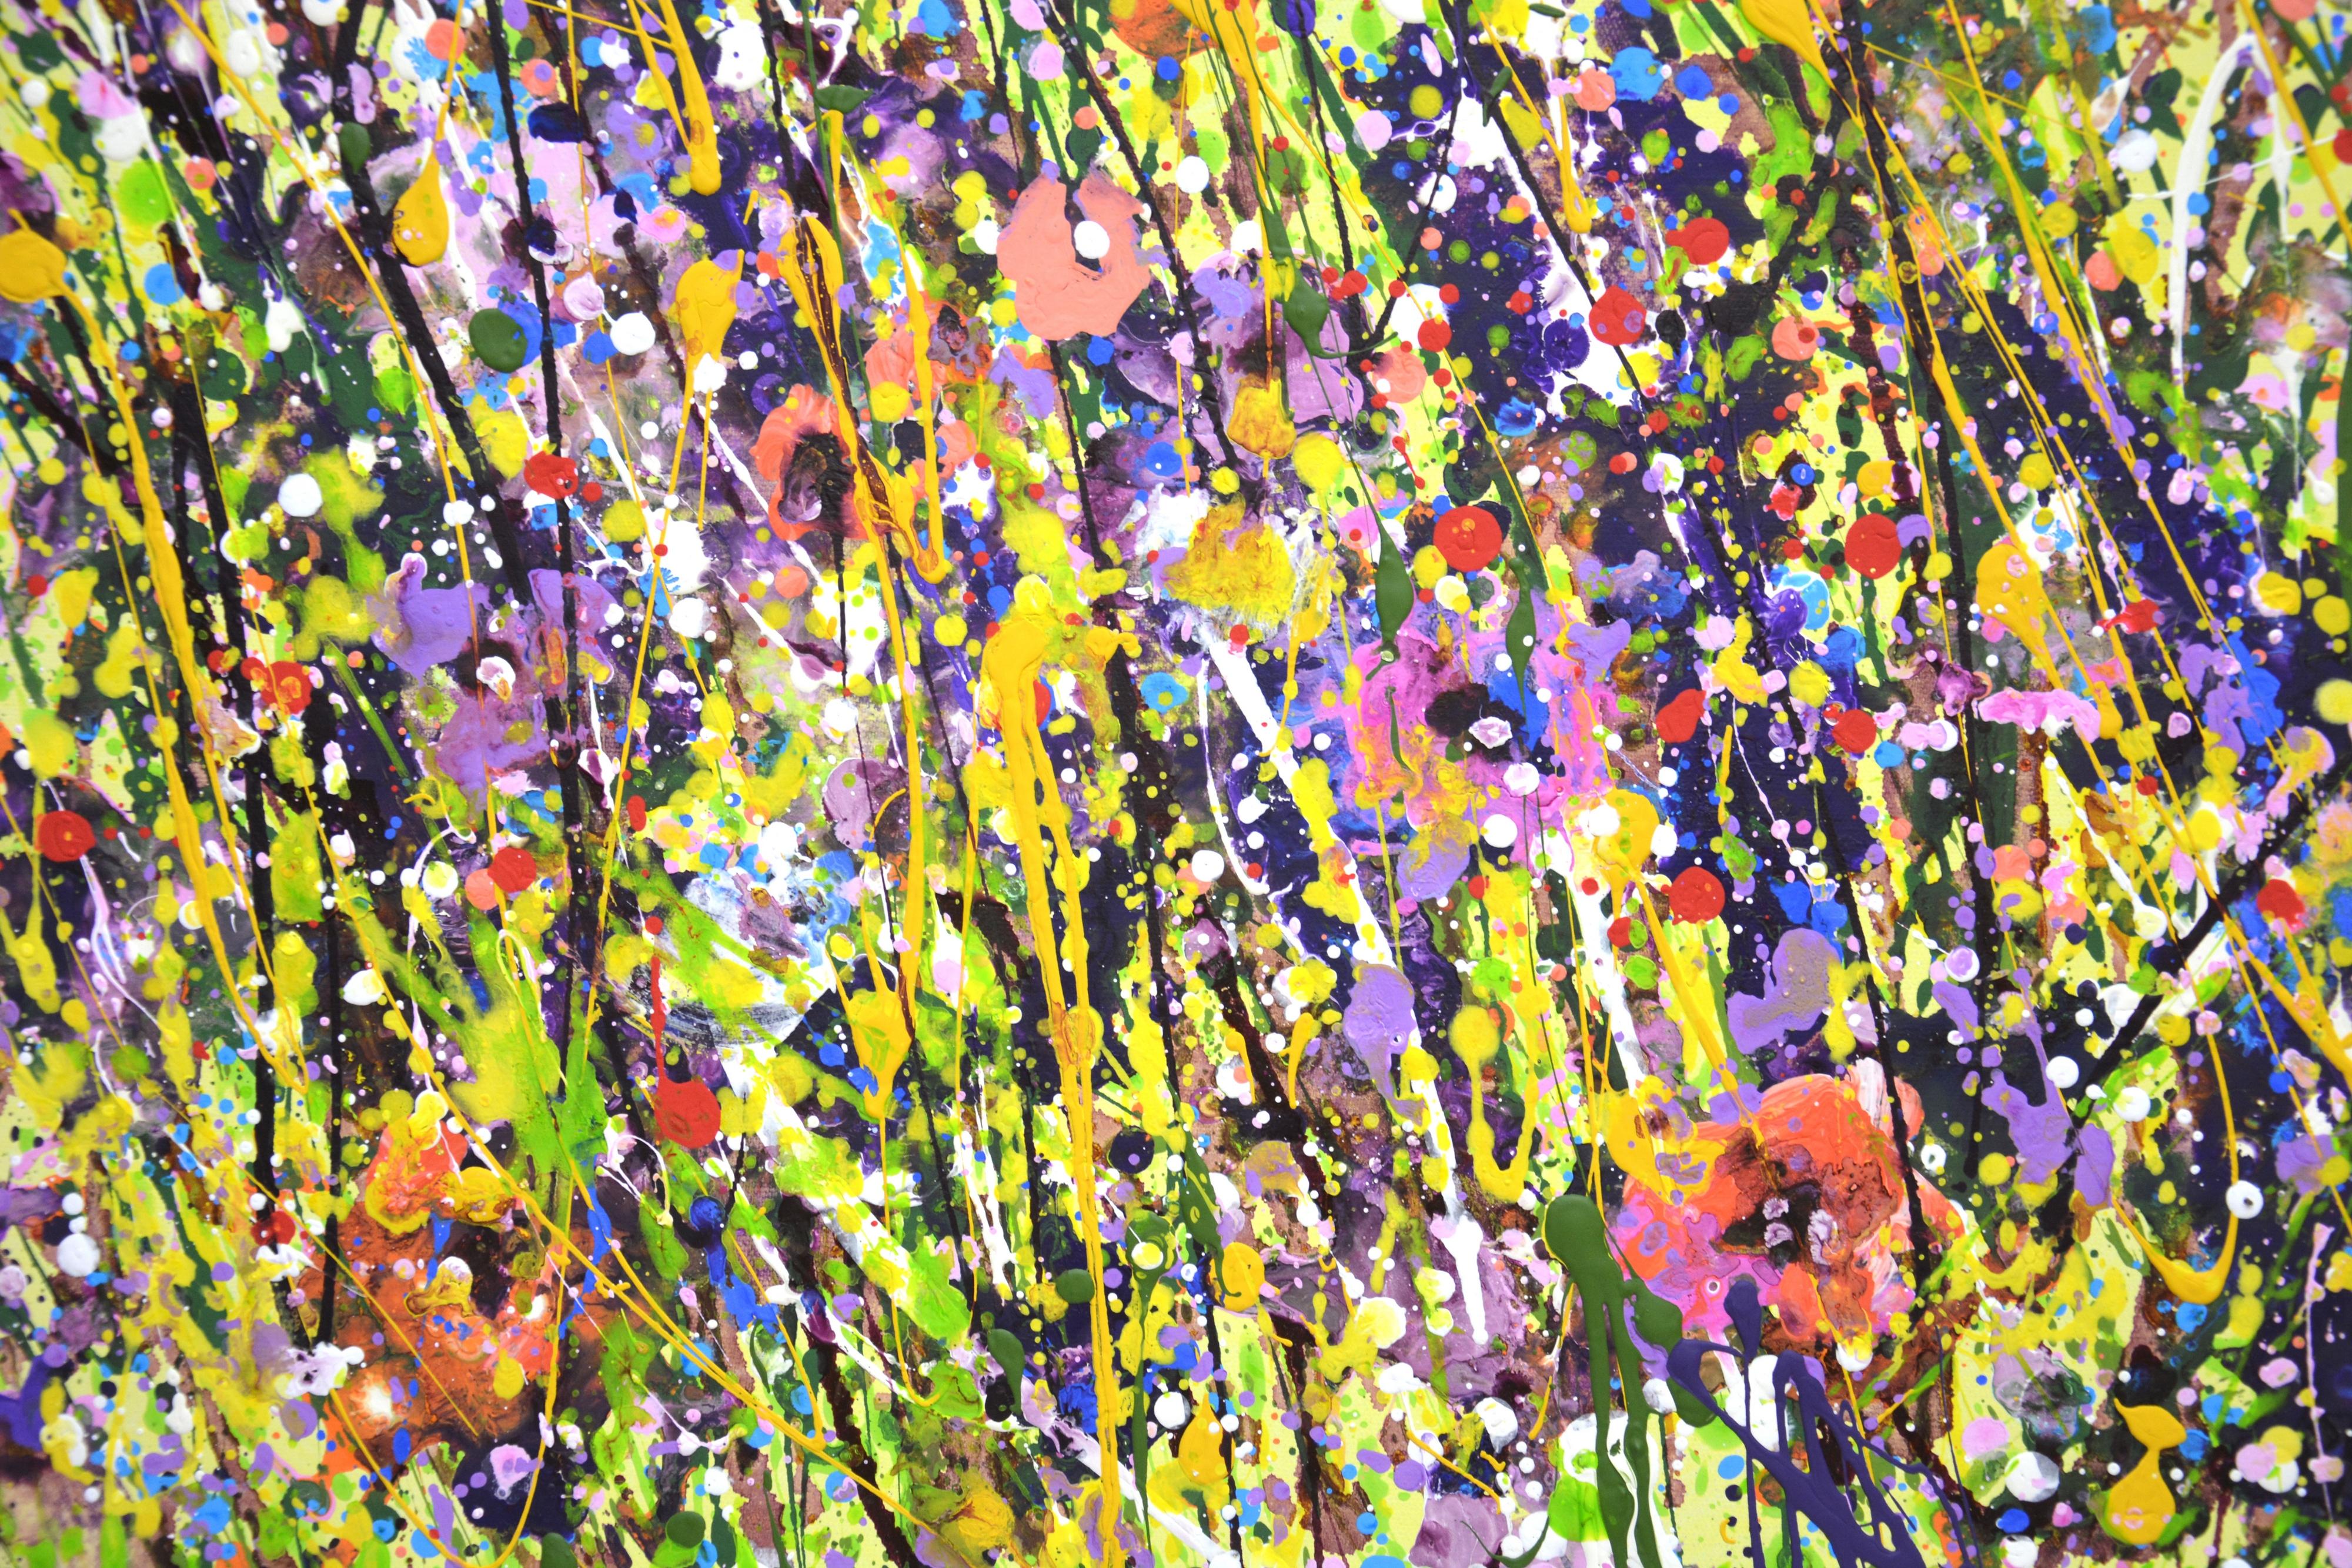 Summer. Wildflowers. A holiday of succulent herbs on a summer day, the whole earth is warmed with warmth, clear skies, bright wildflowers, poppies, create an atmosphere of relaxation, harmony and bliss. Expressionism. Nature is an inexhaustible